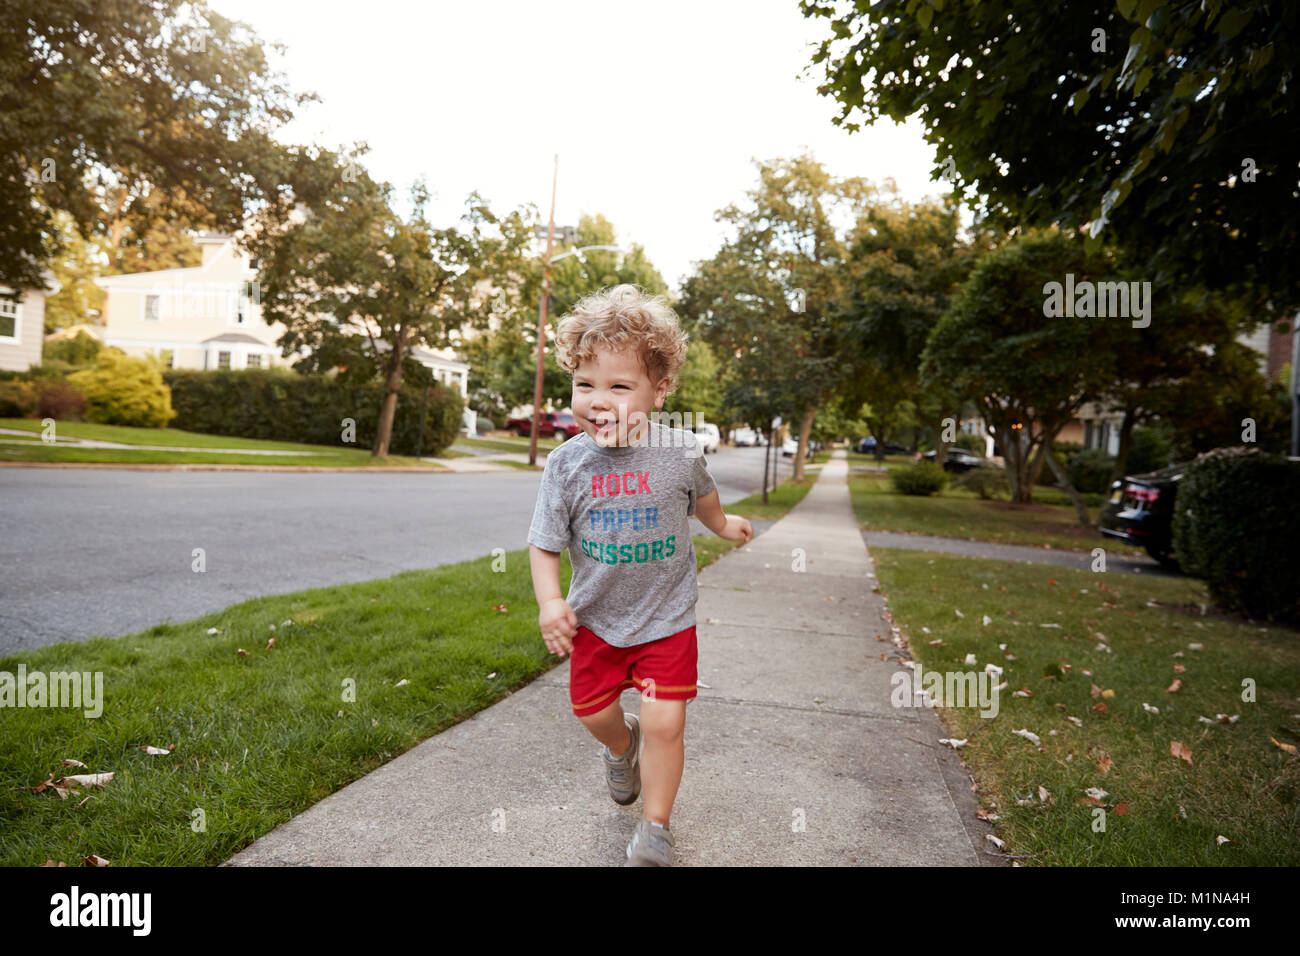 Toddler boy running in a quiet residential street Stock Photo